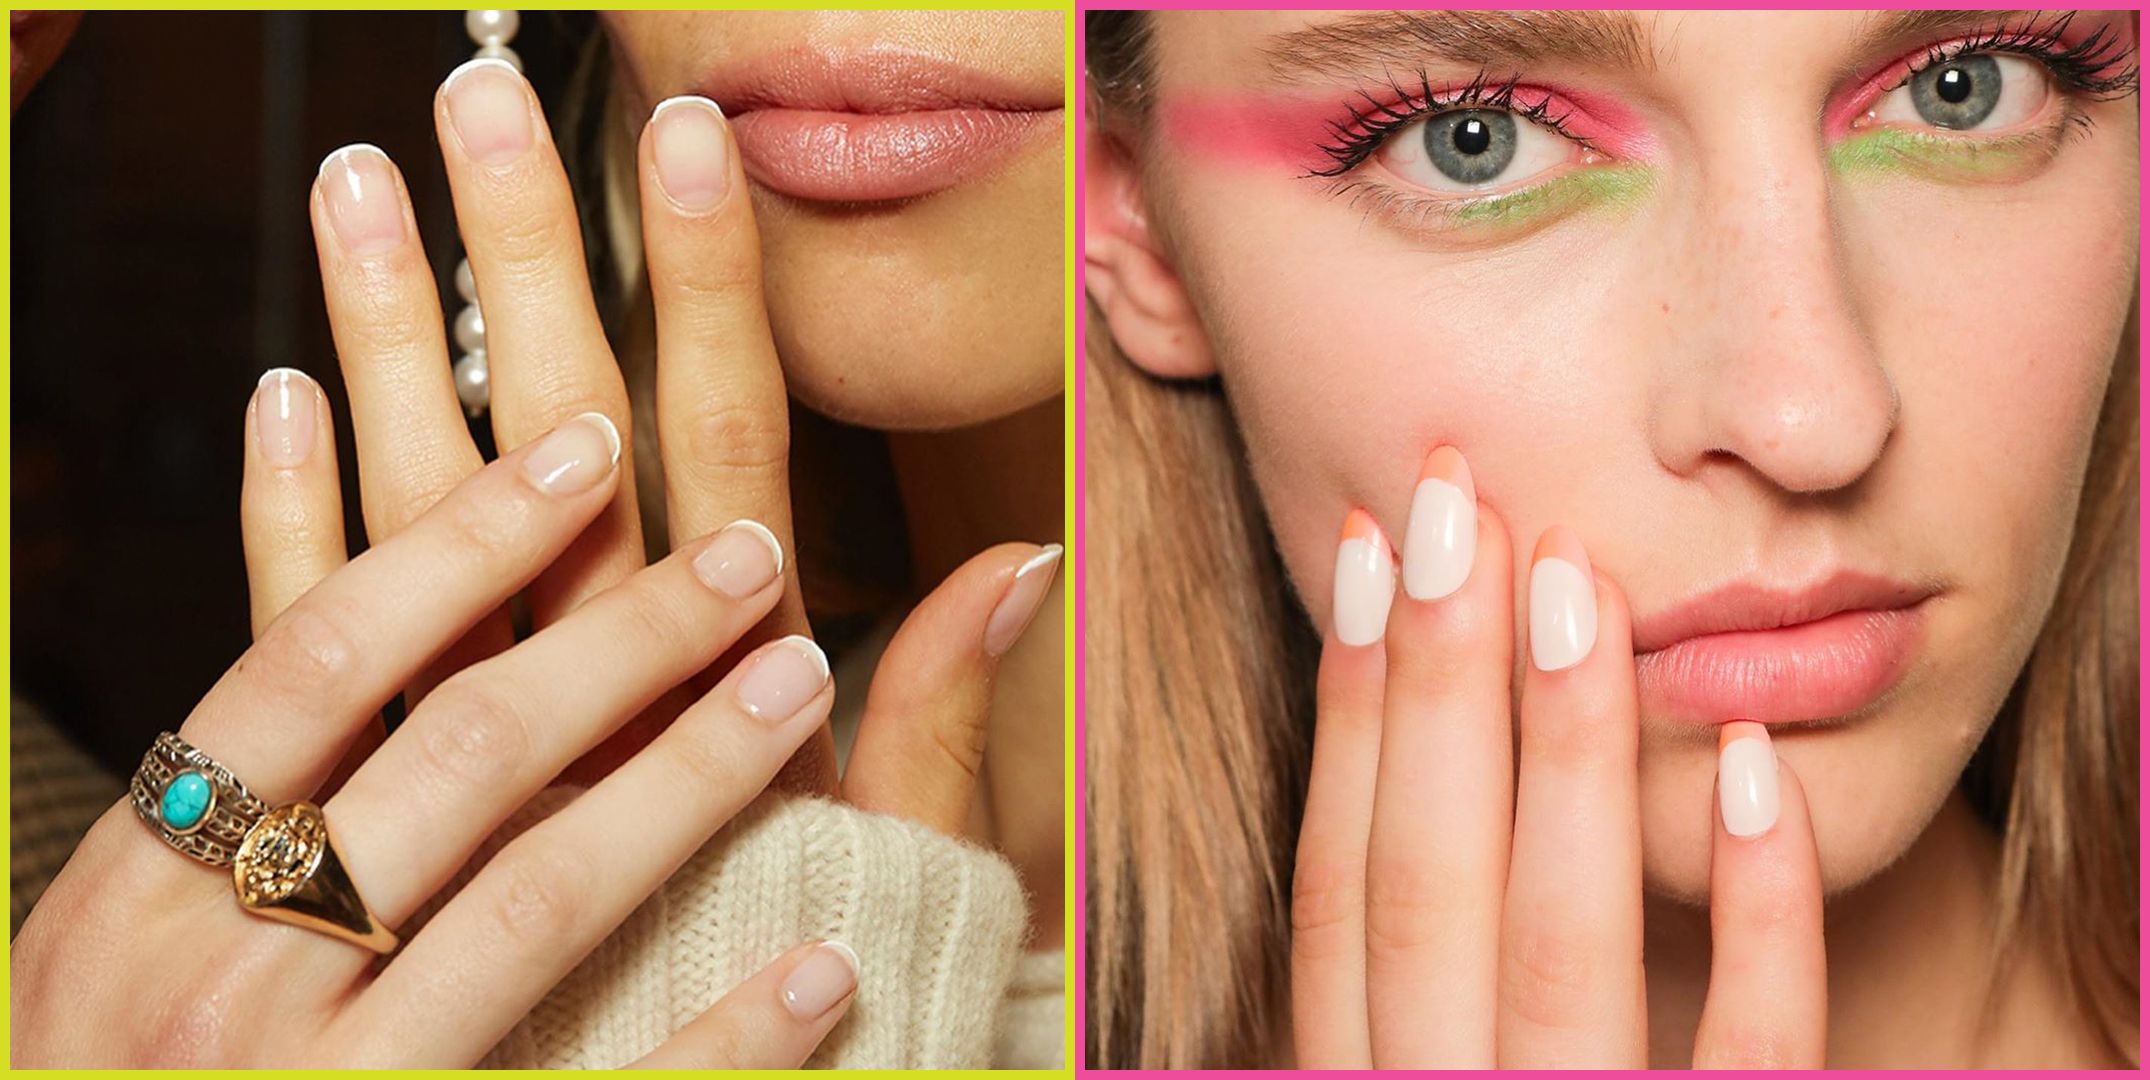 Lip Gloss Nails is the new manicure trend worth obsessing over